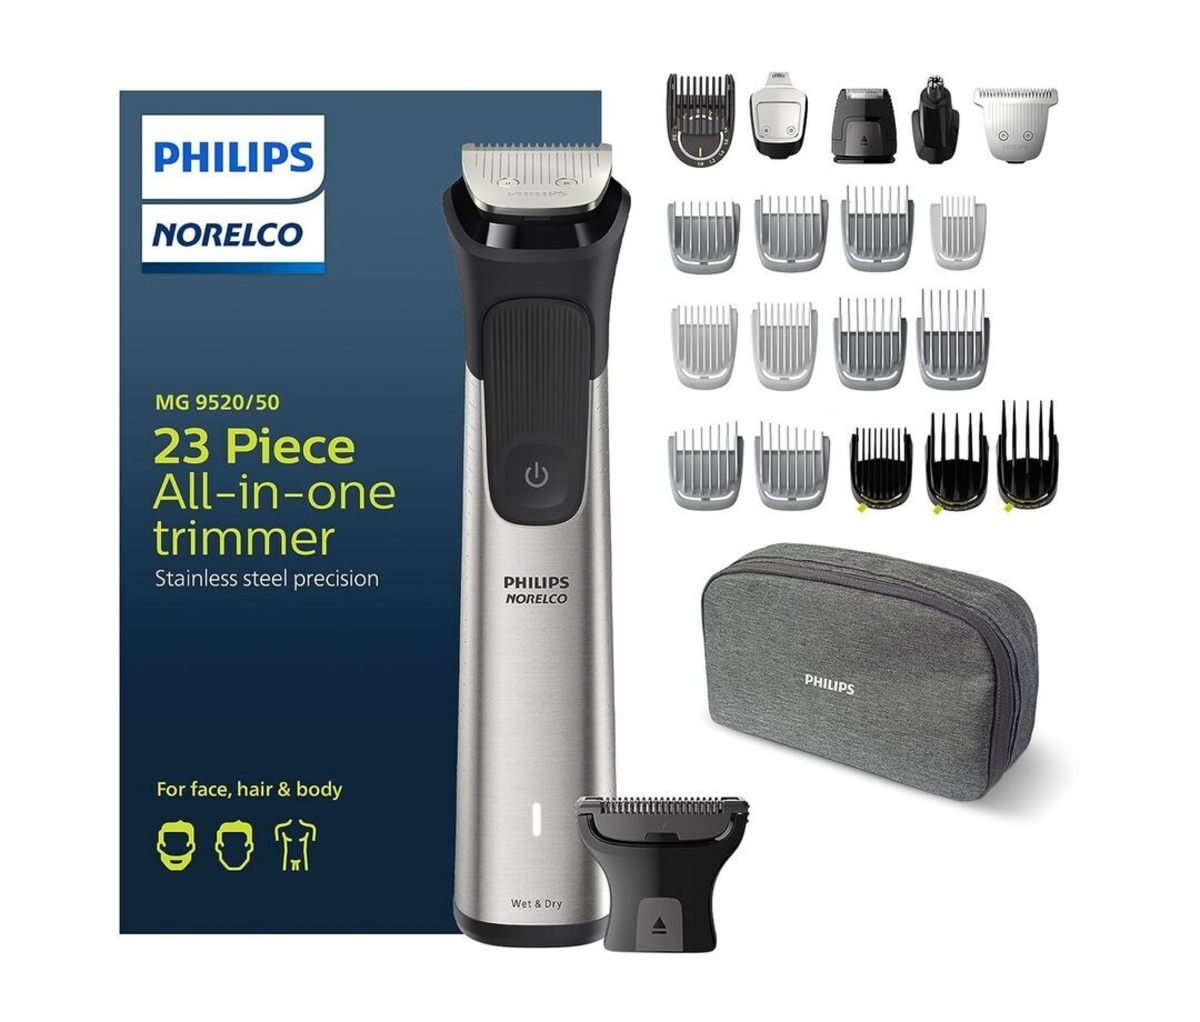 Philips 7000 review: The ultimate multigroomer for the modern man